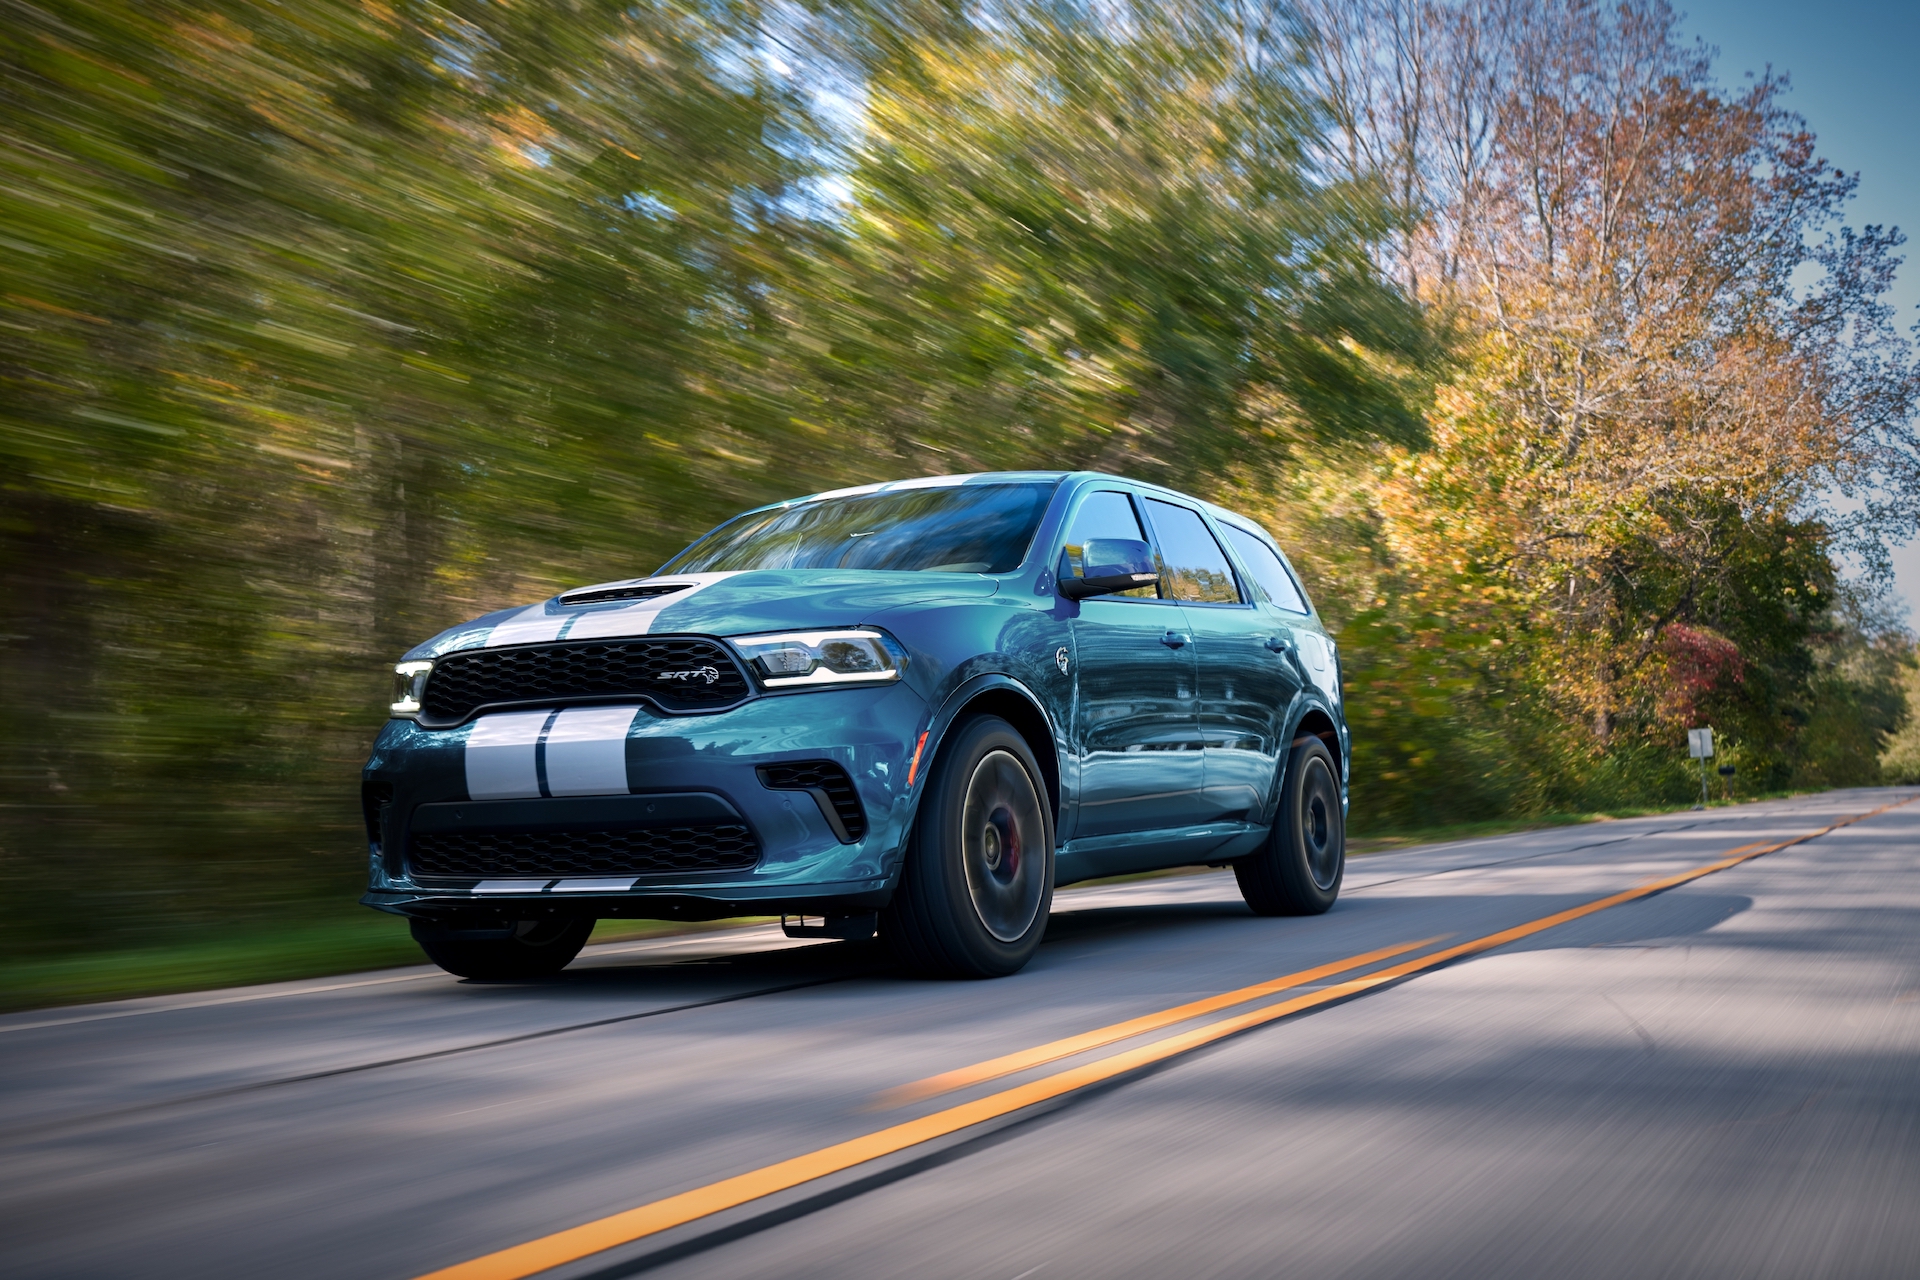 The V-8 will live on at Dodge for now, just not in a muscle car